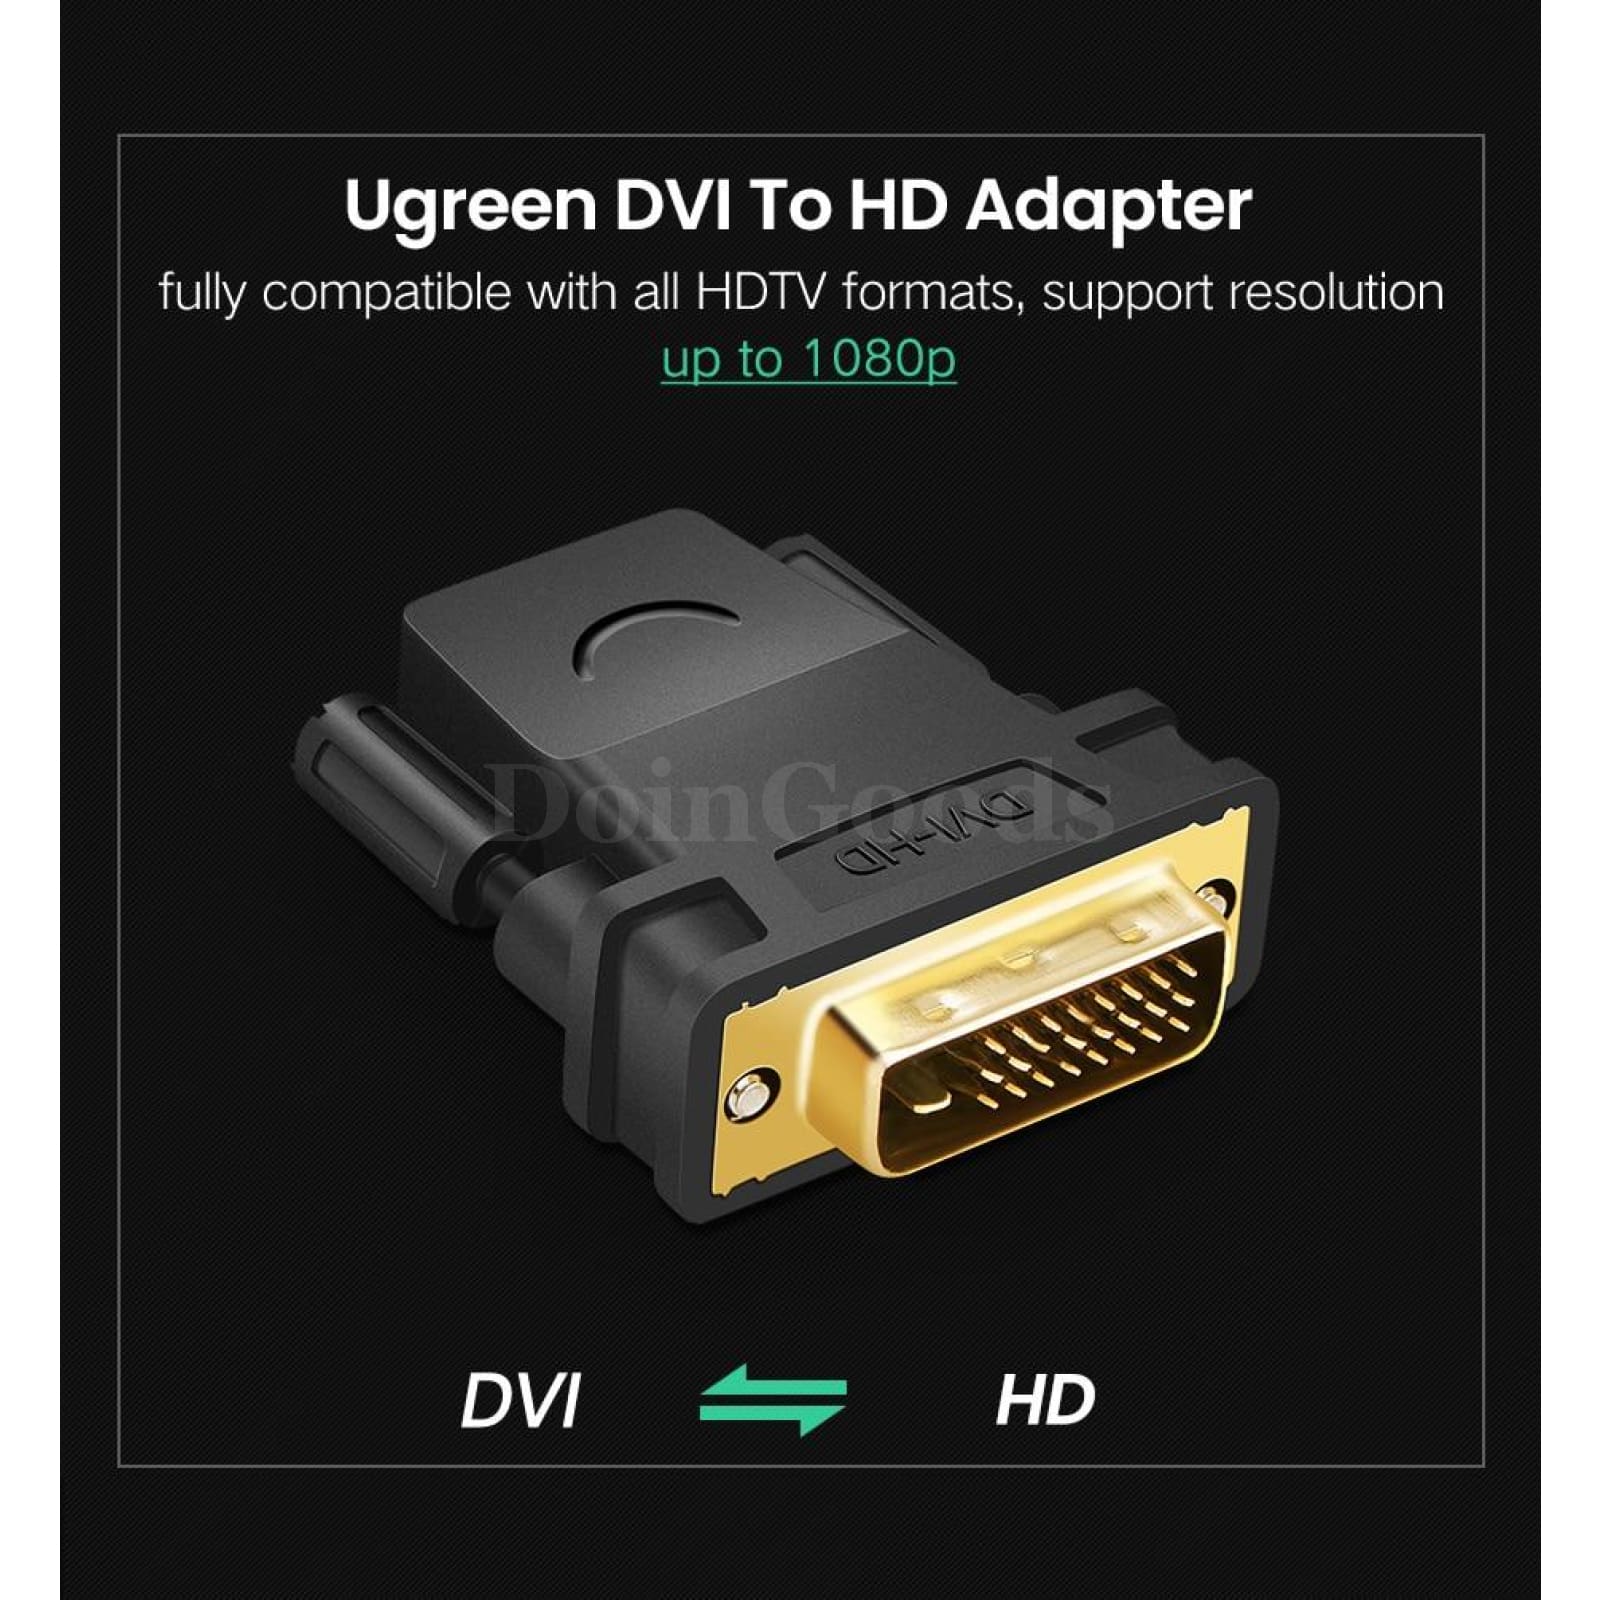 Ugreen Dvi-D Male 24 1 Pin To Hdmi Female 19-Pin Dvi Adapter Bidirectional Cable 301635